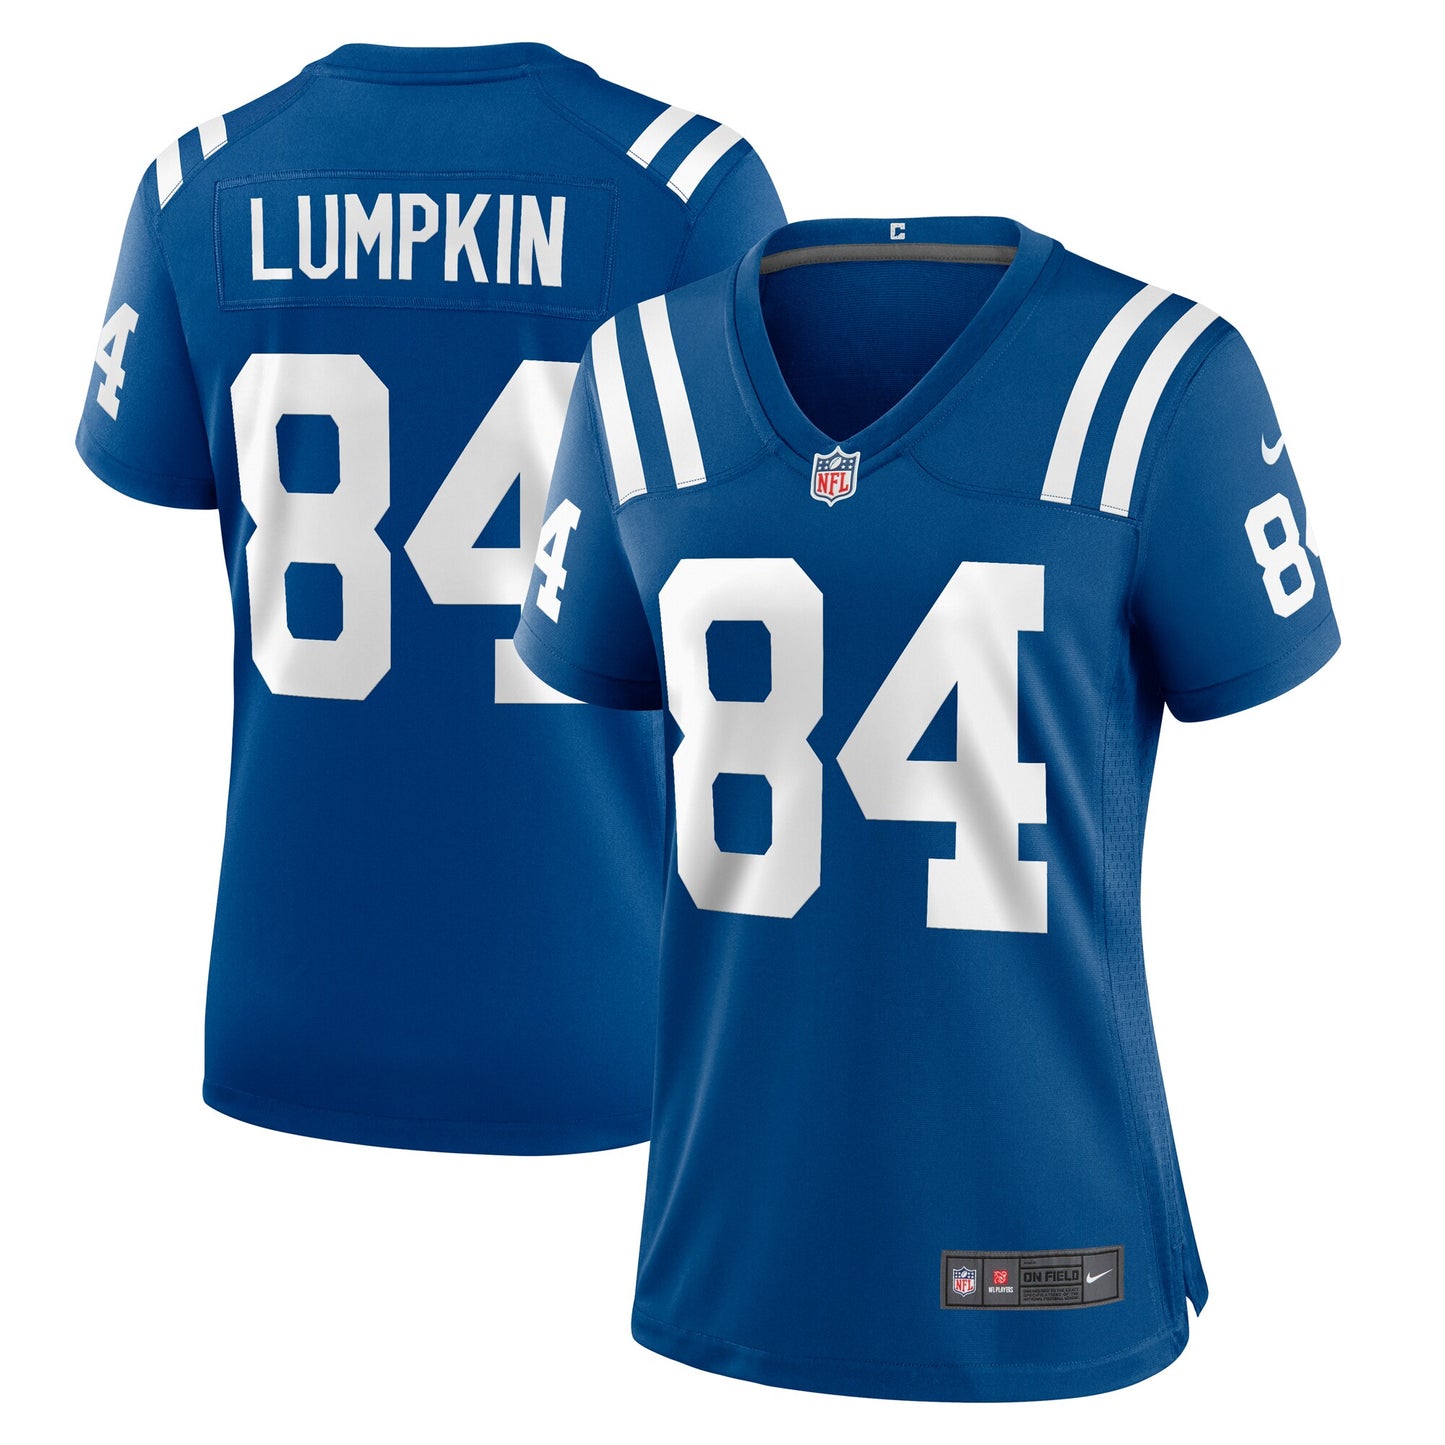 Johnny Lumpkin Indianapolis Colts Nike Women's Team Game Jersey - Royal